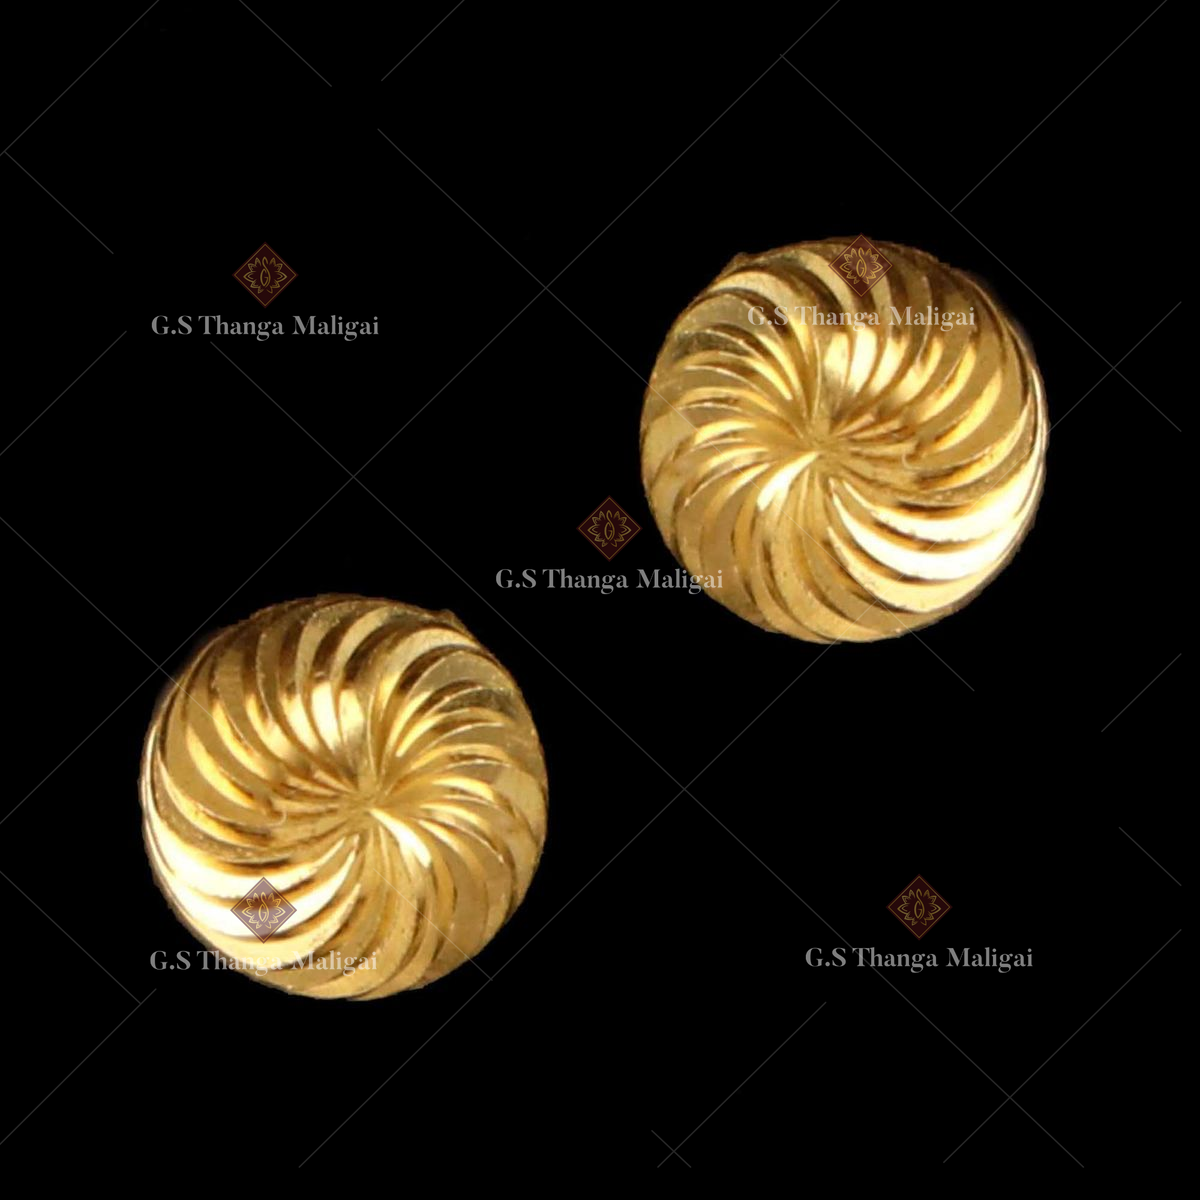 Small Size Multi Stone Gold Stud Earring Collections ER2382